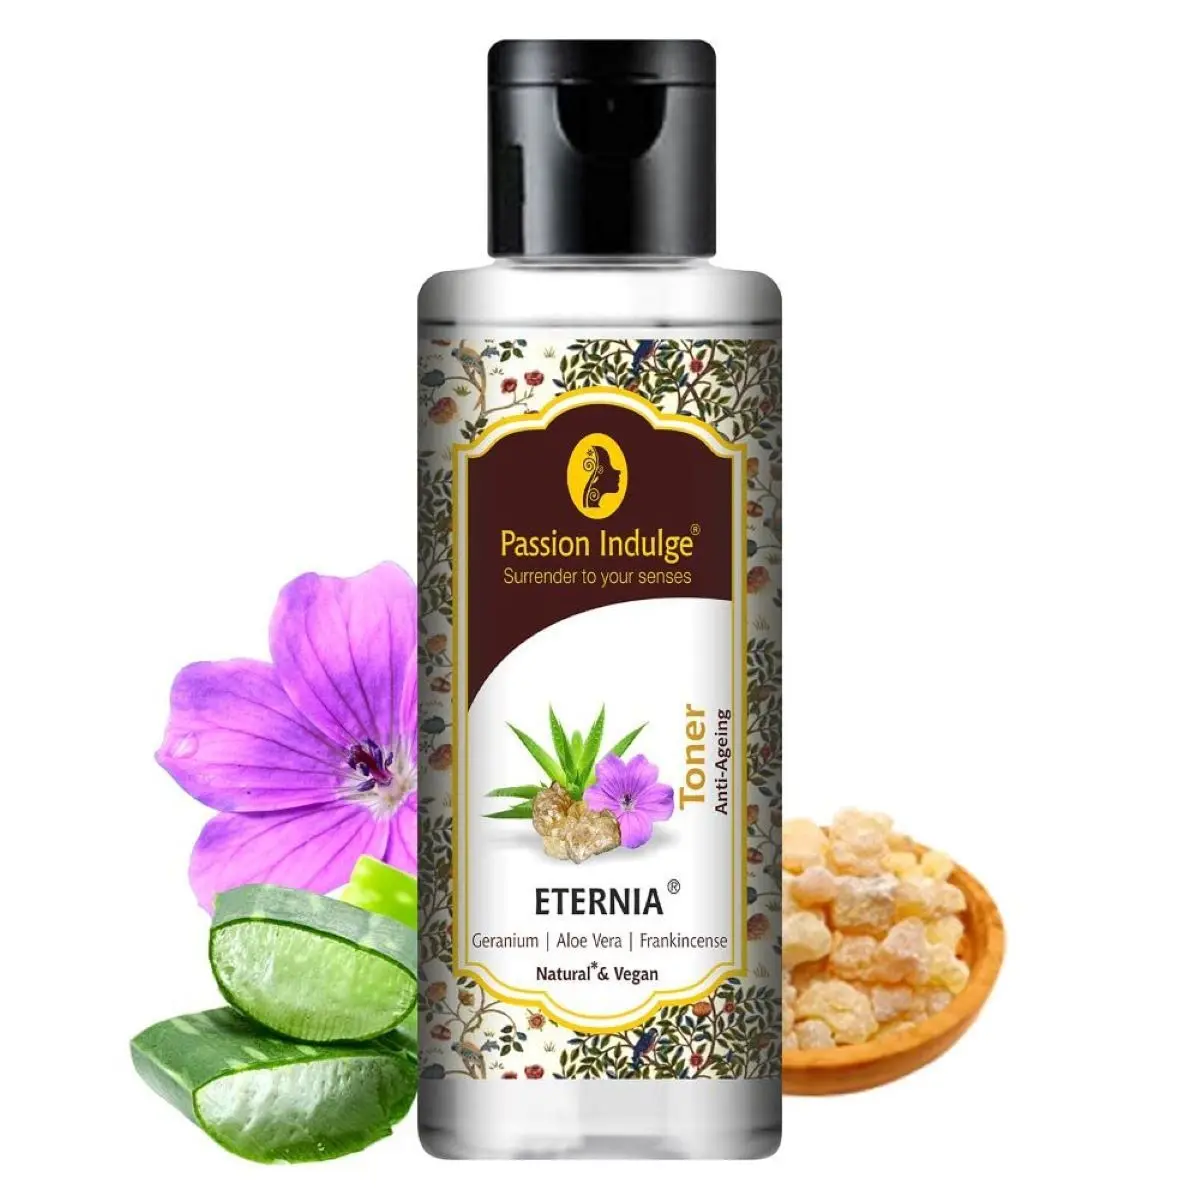 Passion Indulge ETERNIA TONER For Anti-ageing and anti-Wrinkle 100ML